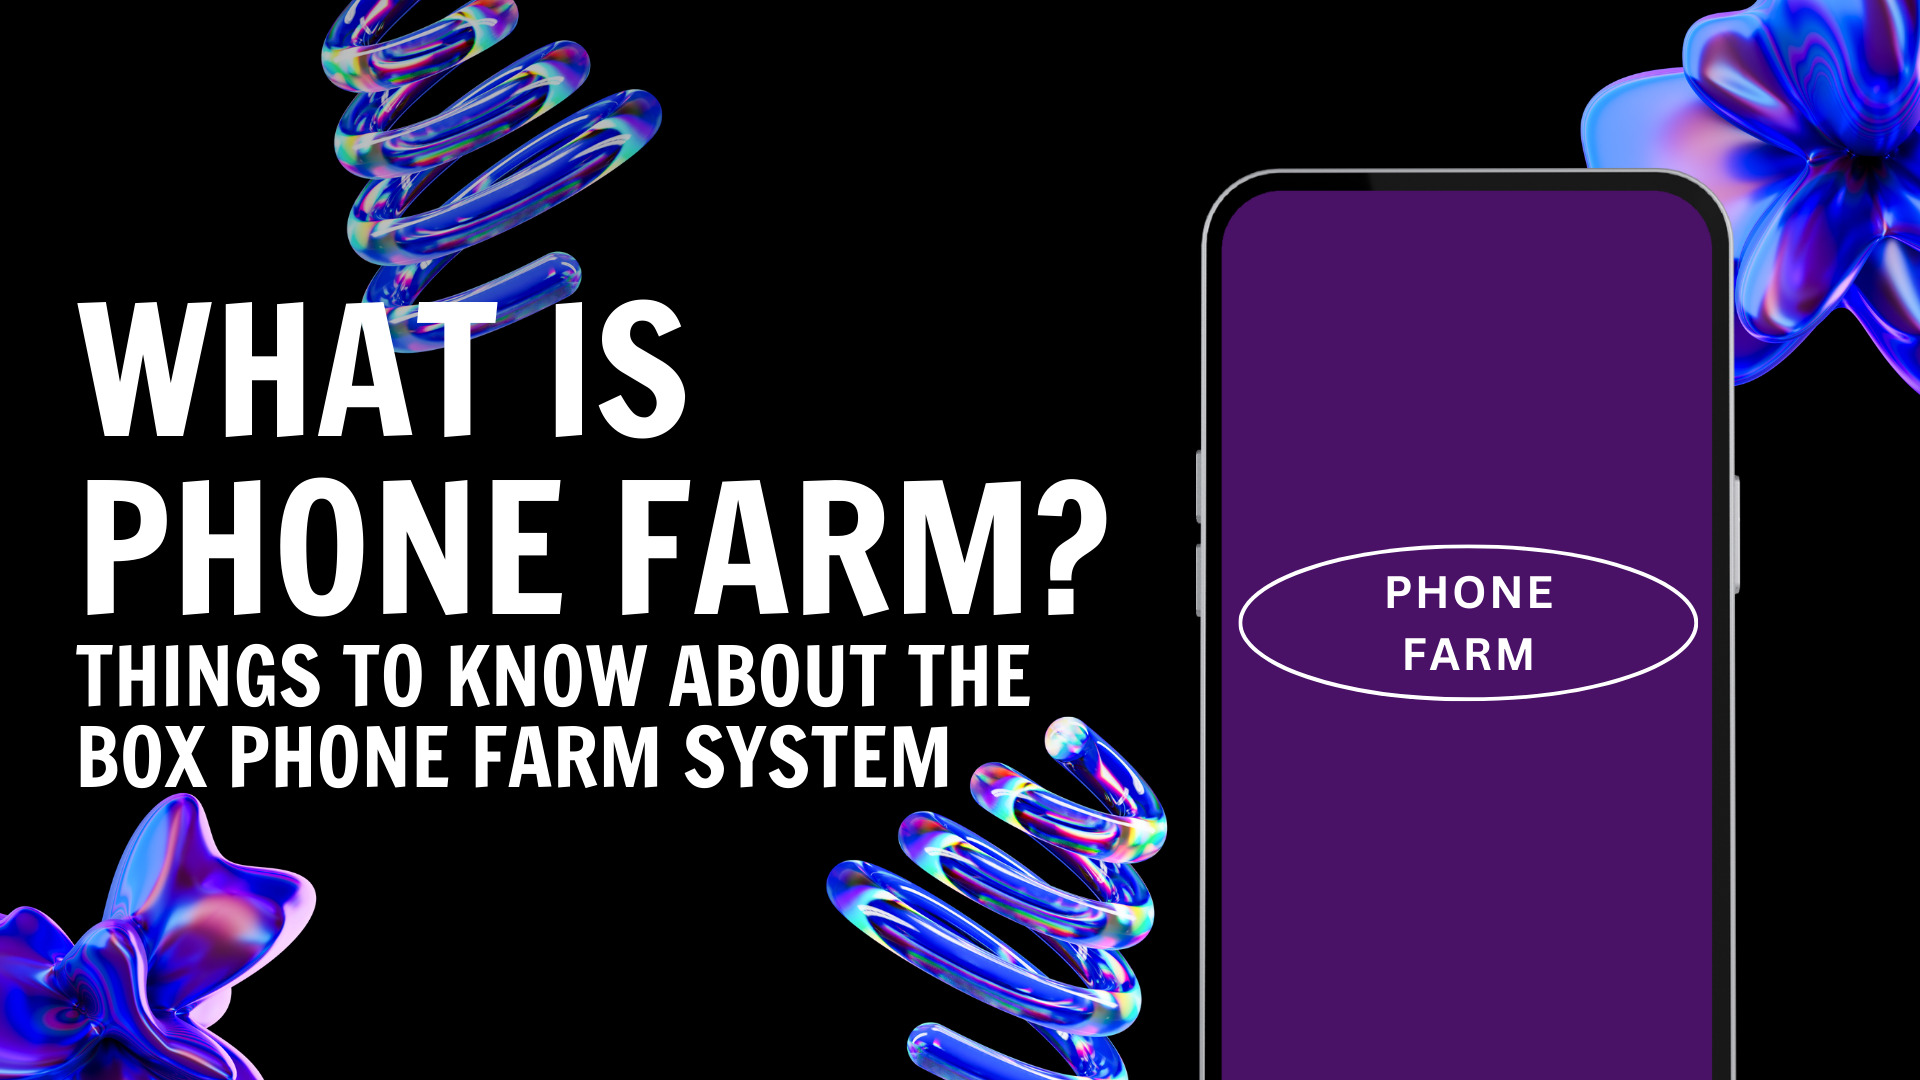 What is Phone Farm? Things to know about the Box Phone Farm system